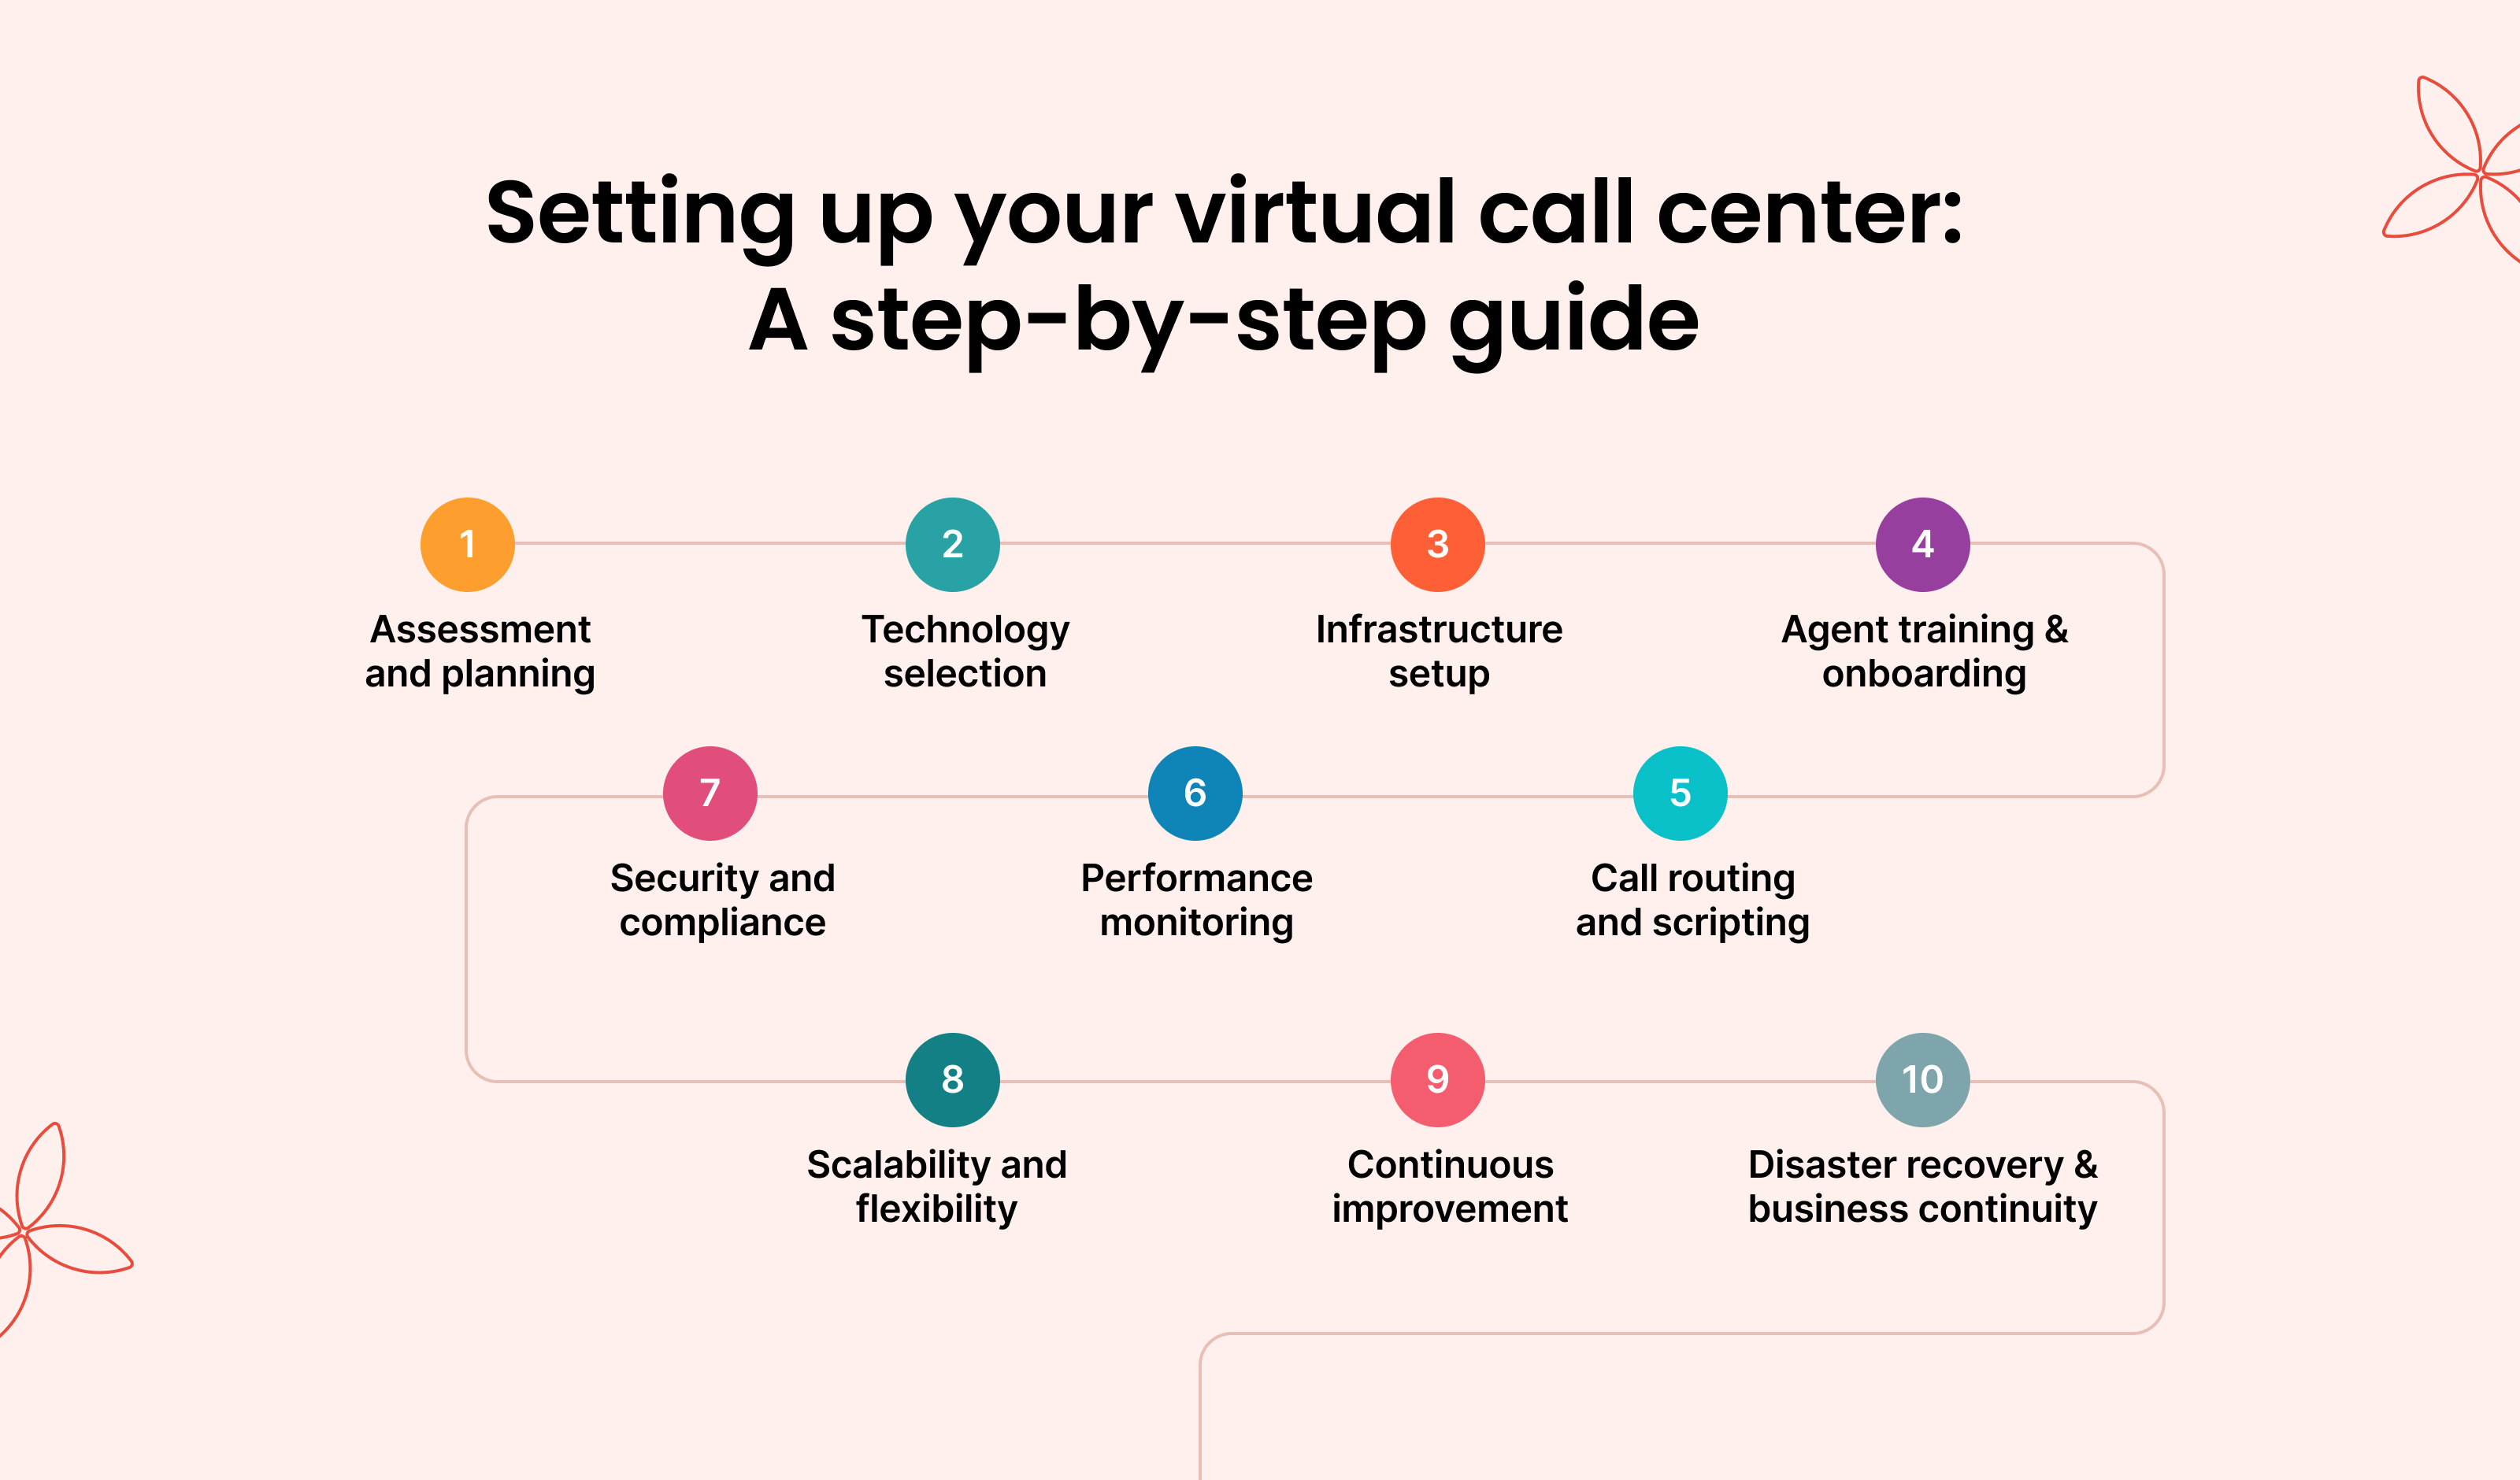 Setting Up Your Virtual Call Center: A Step-by-Step Guide